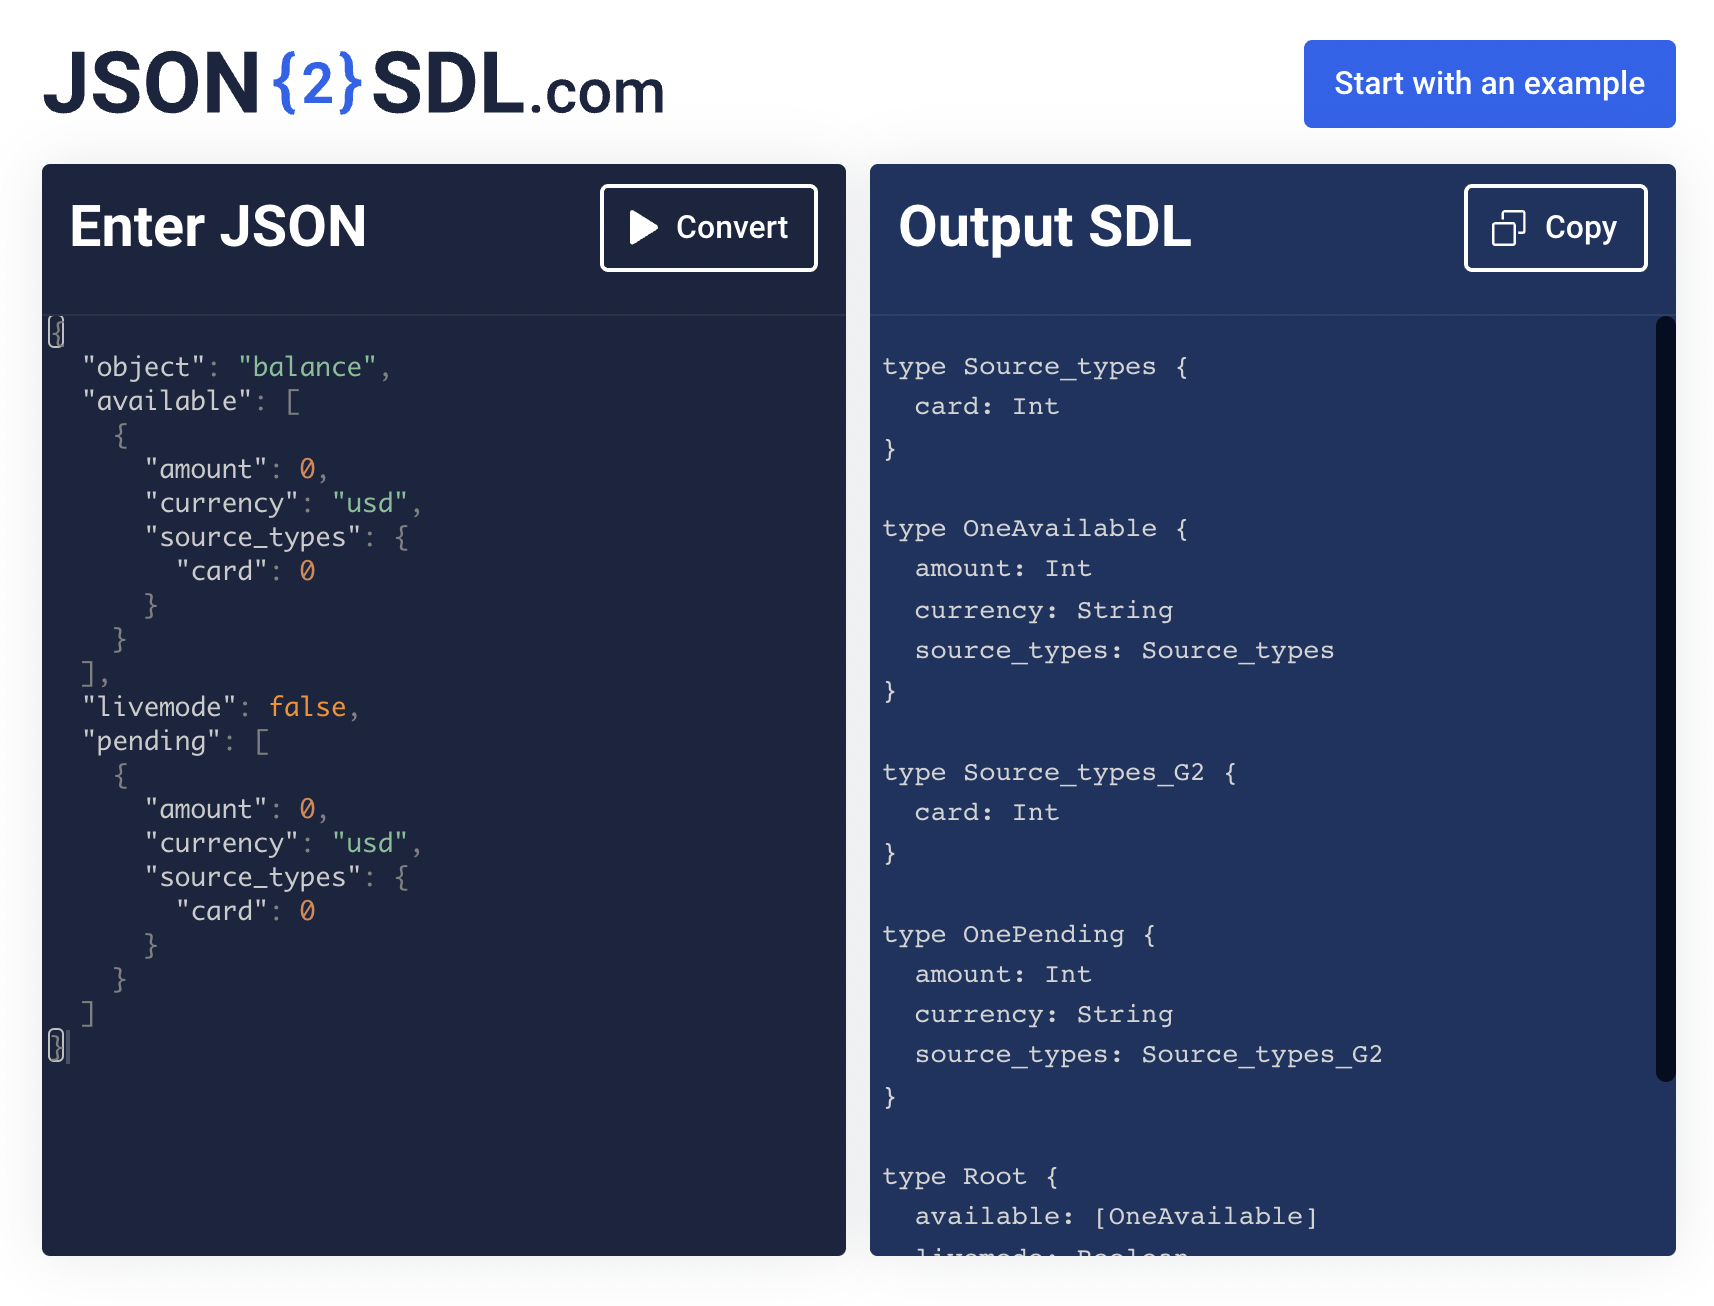 JSON2SDL editor screenshot with example code